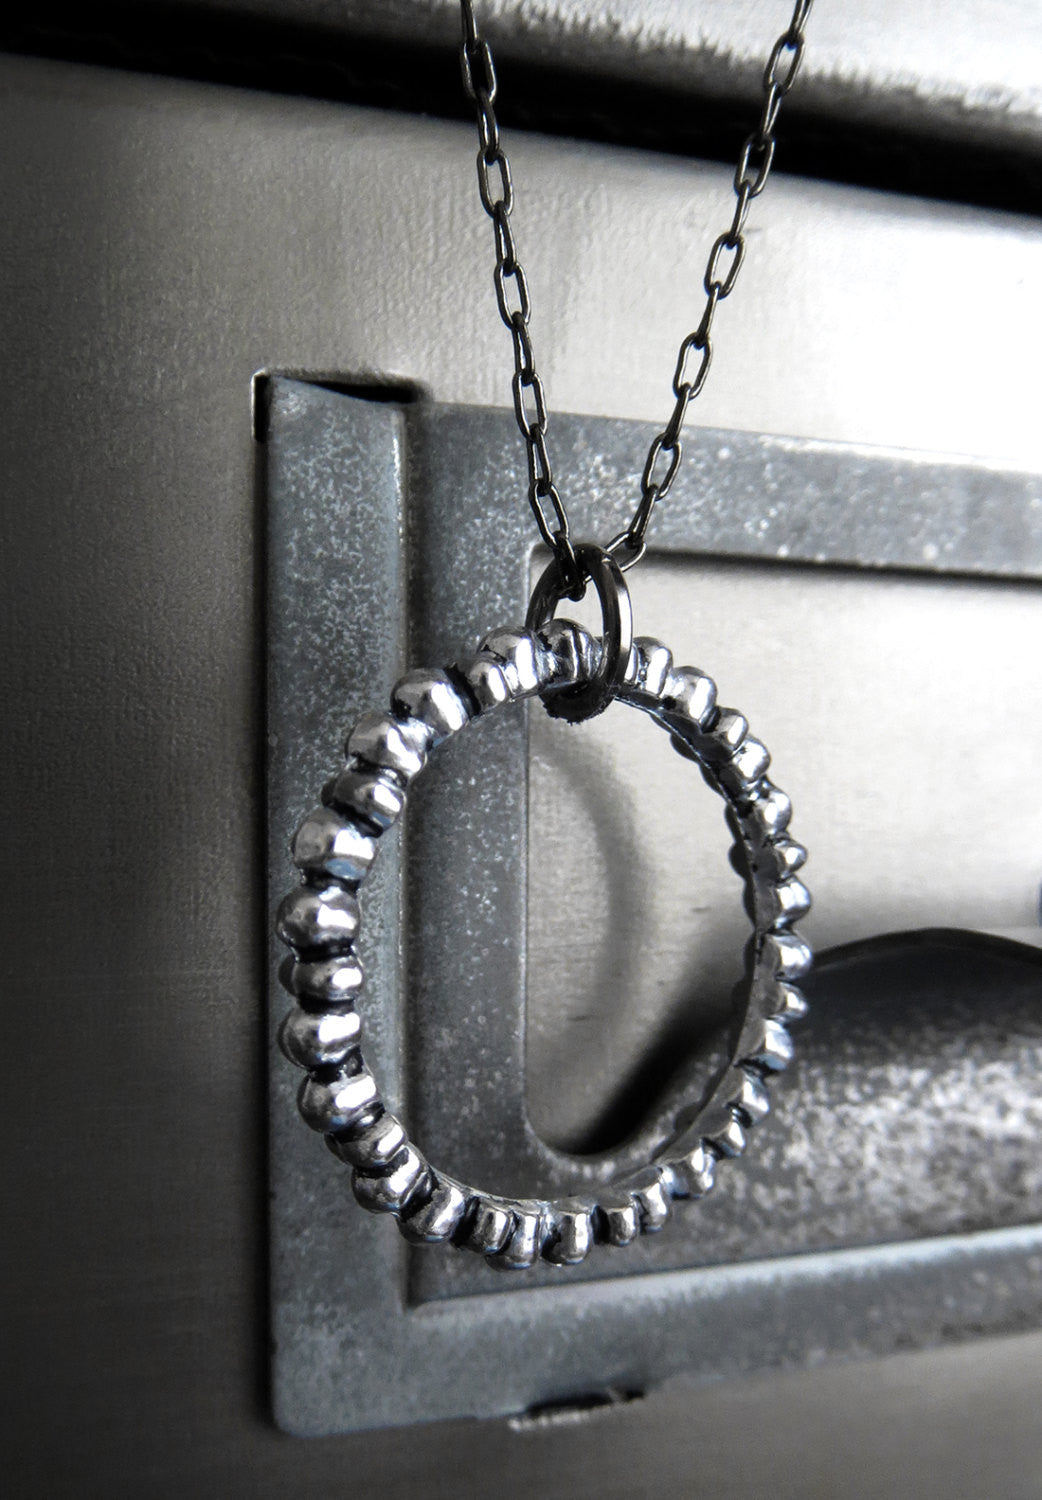 Textured Silver Circle Pendant Necklace on Gunmetal Black Chain